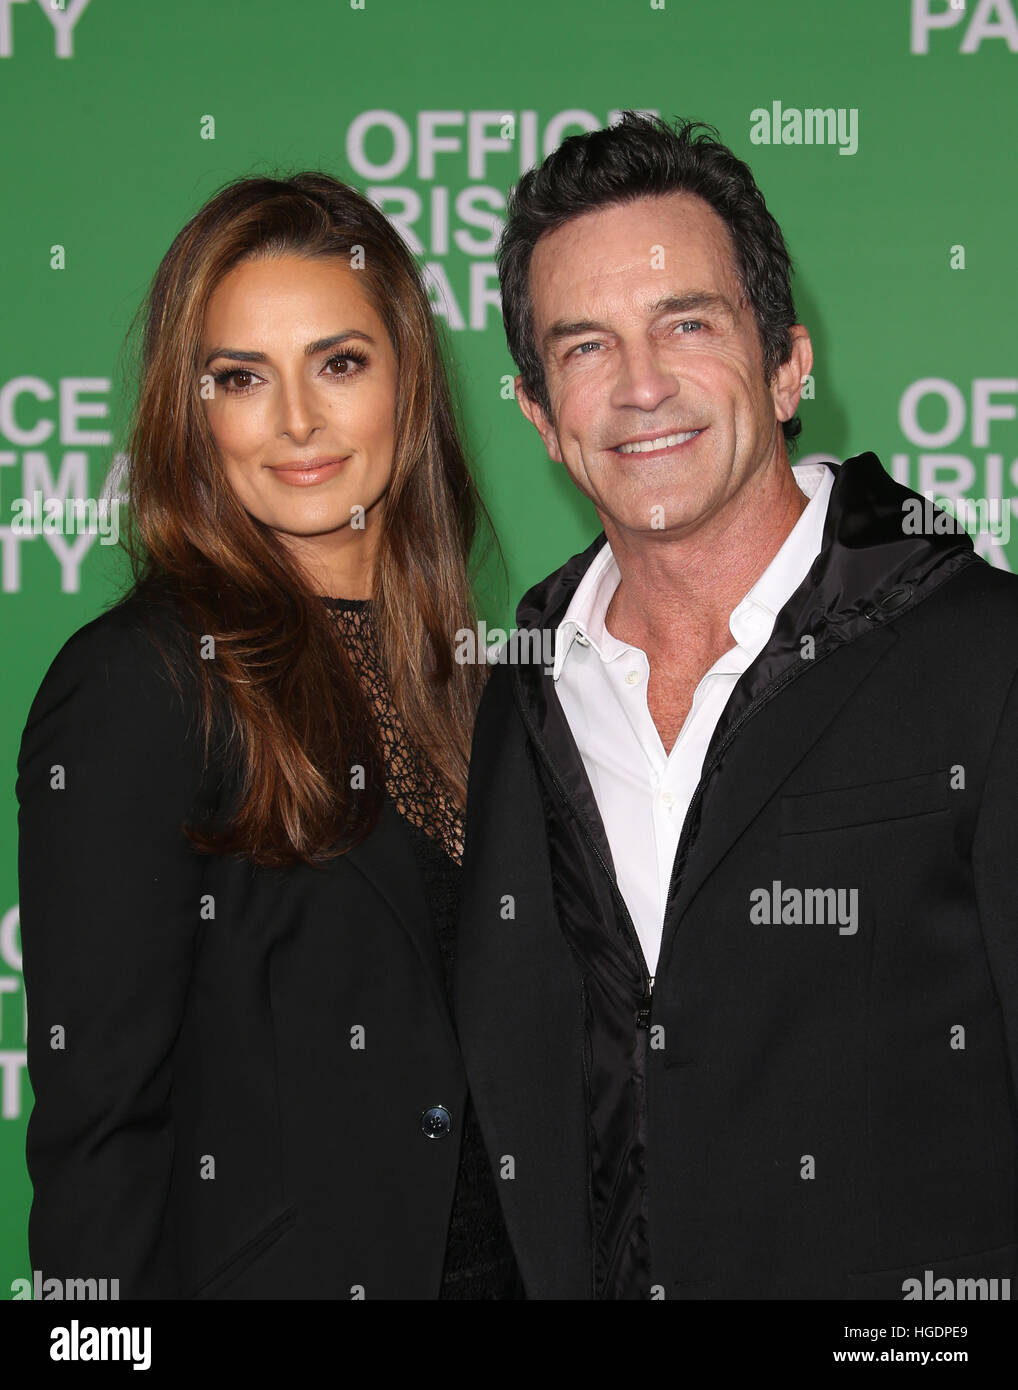 Premiere of Paramount Pictures' 'Office Christmas Party' - Arrivals  Featuring: Jeff Probst, Lisa Ann Russell Where: Westwood, California, United States When: 08 Dec 2016 Stock Photo